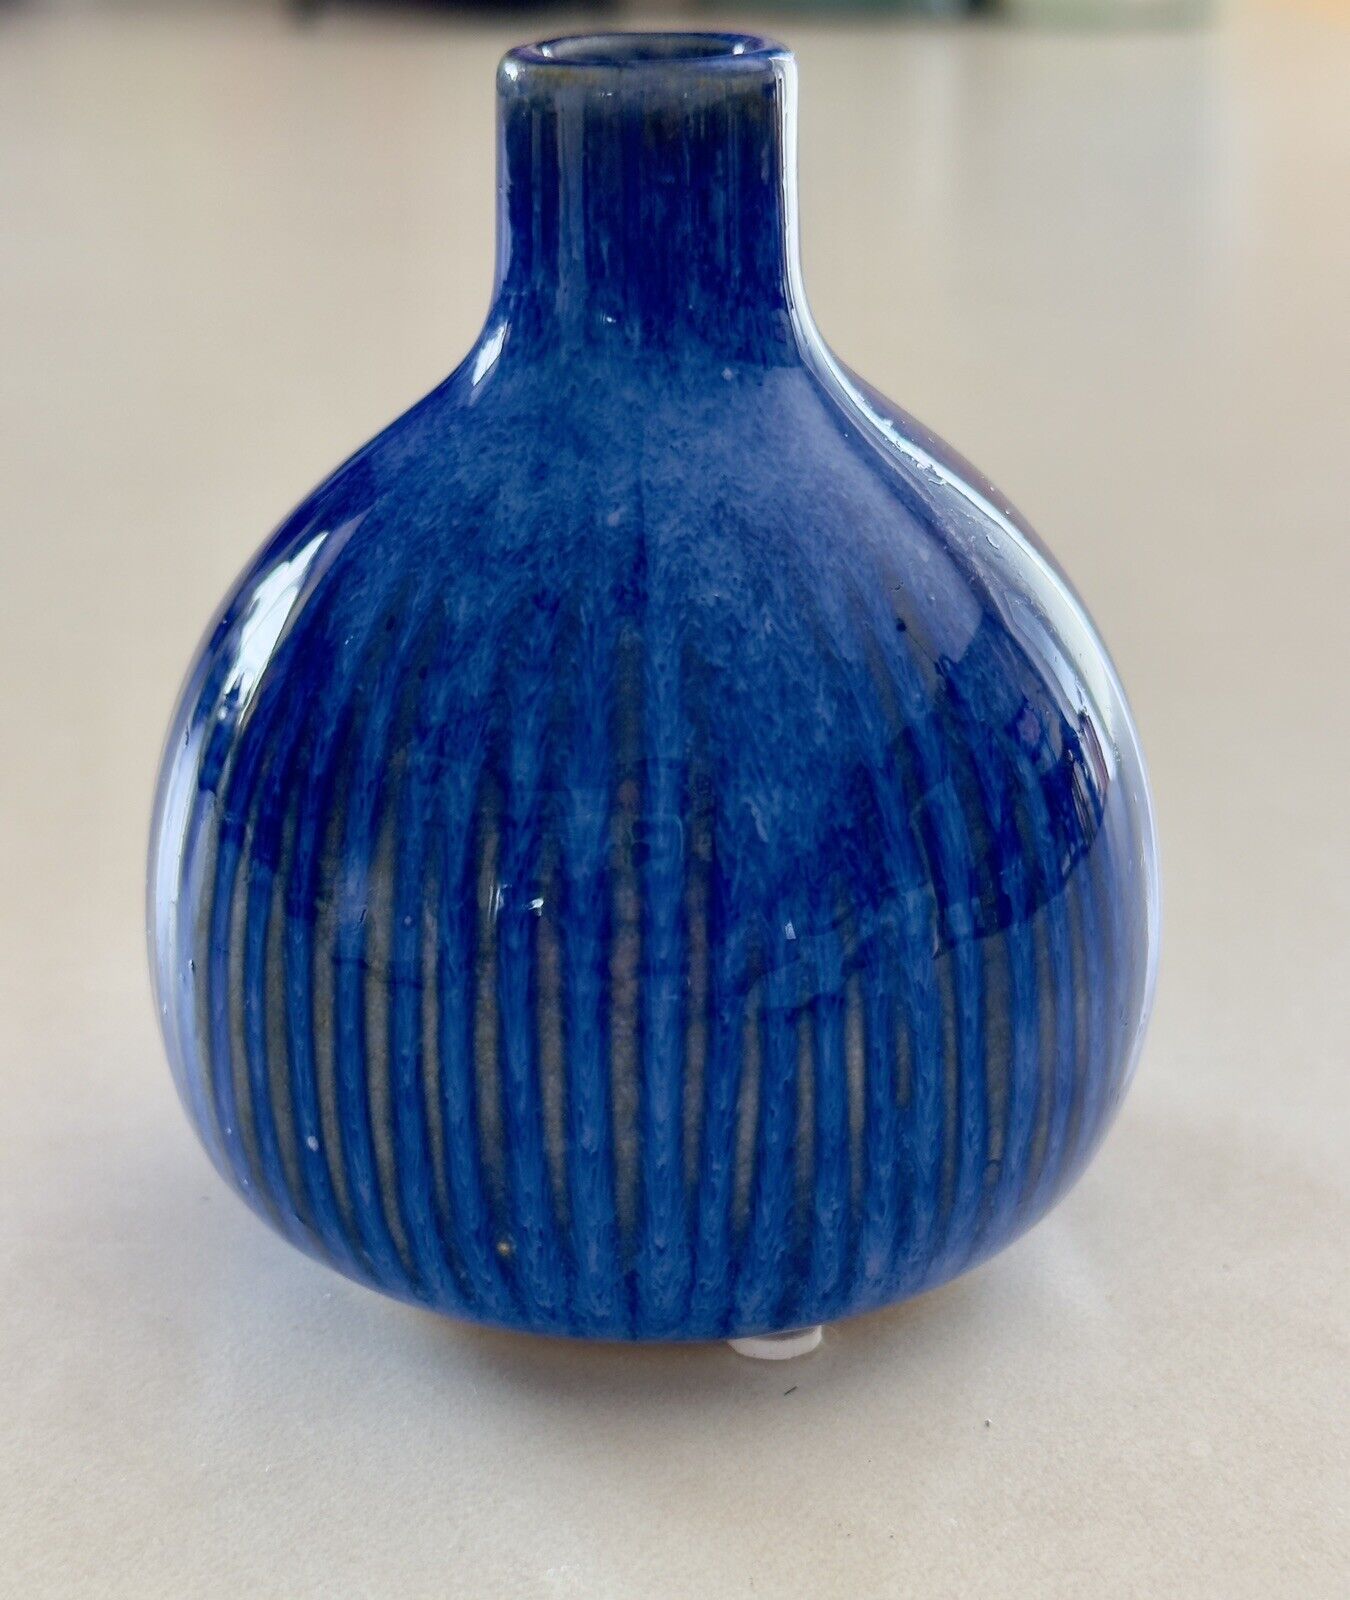 Swirled Blue Small Art Studio Pottery Vase Or Ink Well